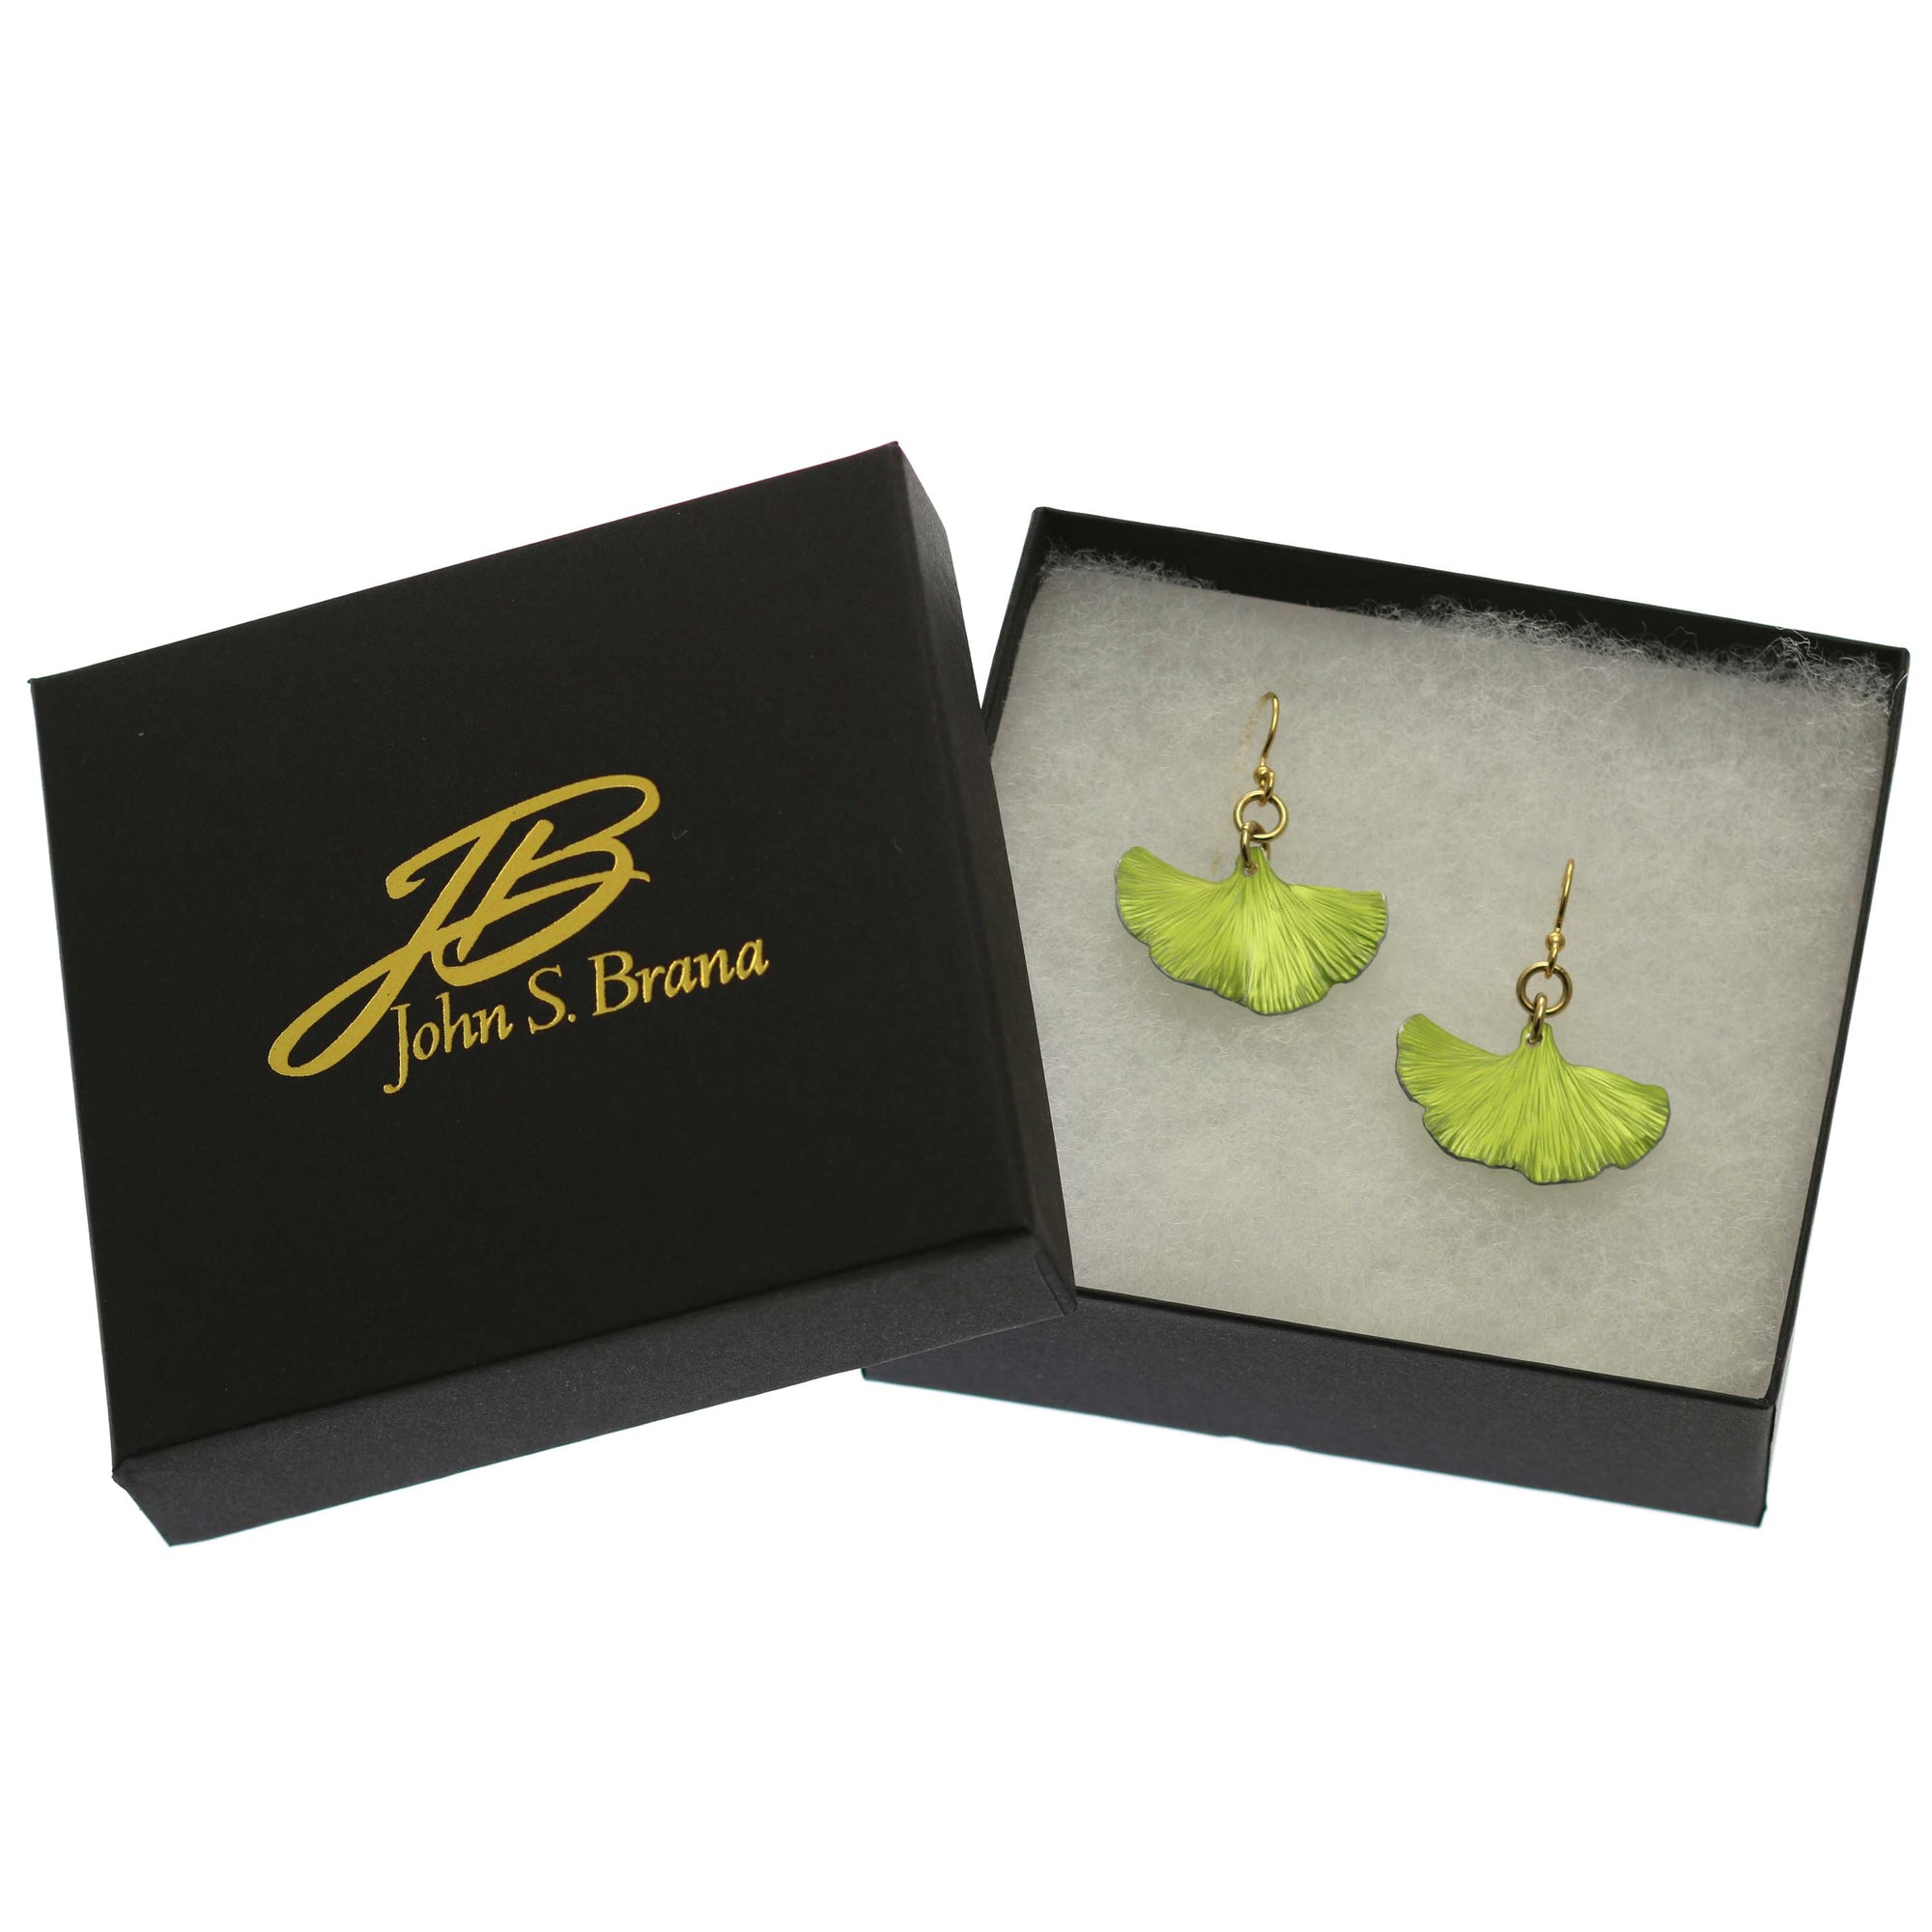 Small Ginkgo Leaf Anodized Aluminum Sour Candy Apple Earrings in a Black Gift Box